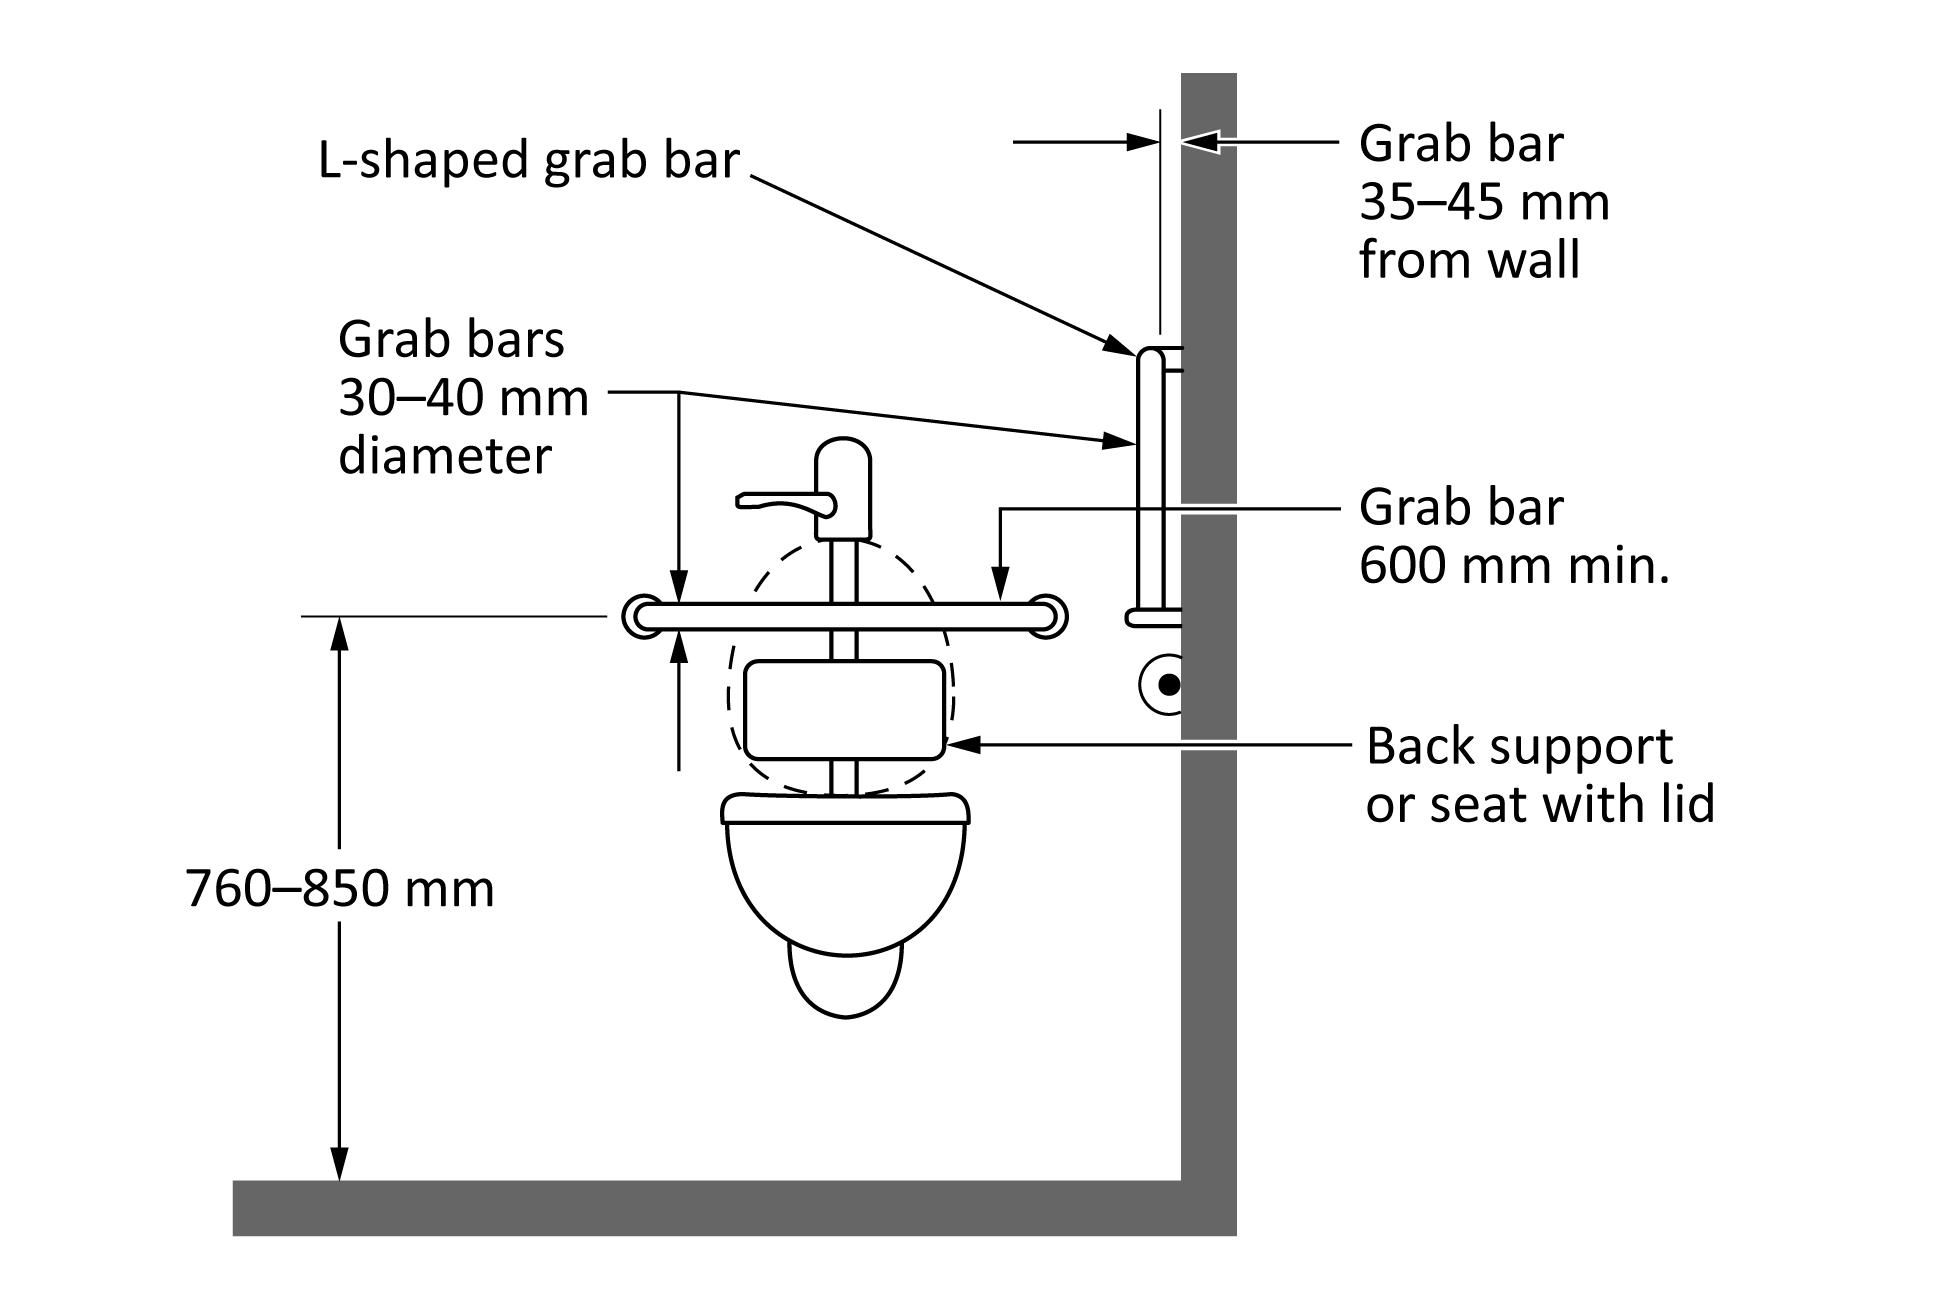 This figure shows an illustration of a toilet seen from the front, the grab bar behind it, and the grab bar to the side of it. The rear grab bar does not obstruct the flush handle of the toilet. The dimensions of the horizontal rear grab bar are labelled as follows: height of 760 mm to 850 mm, a minimum length of 600 mm, and a diameter of 30 mm to 40 mm. All grab bars are shown to be 35 mm to 45 mm from the wall.